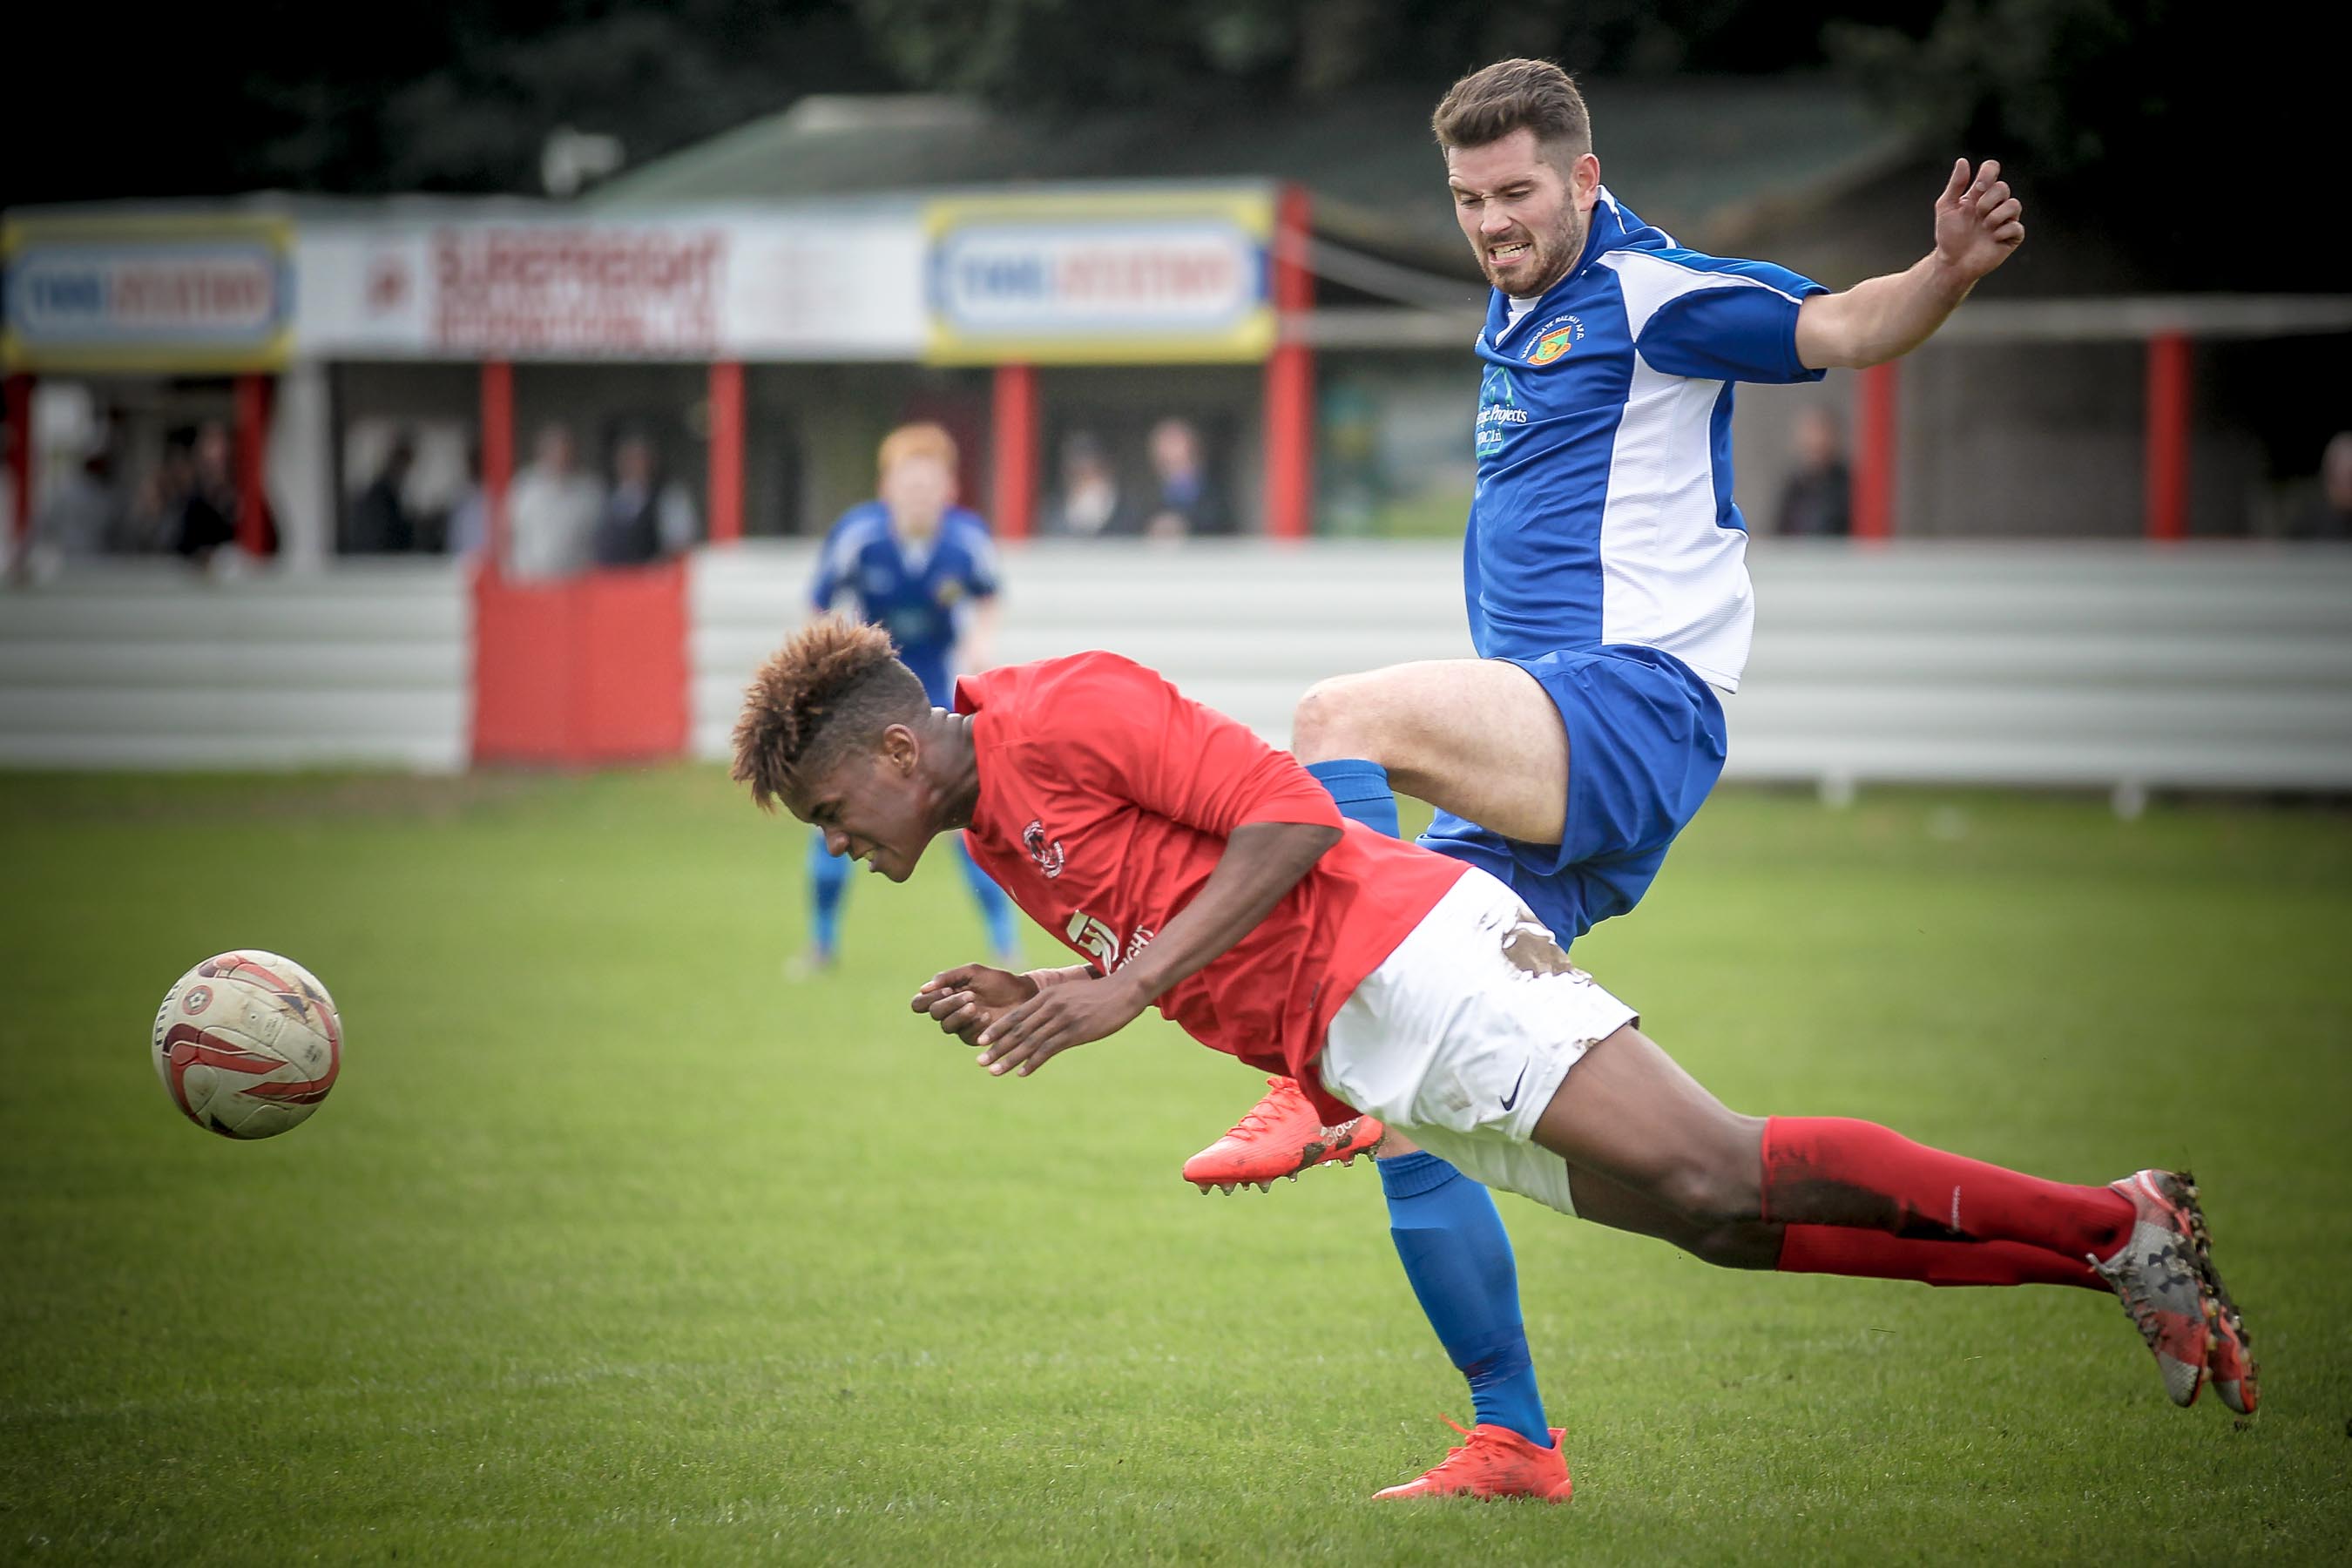 Thackley defender gets a header in as Greg Kidd pulls out from the challenge.